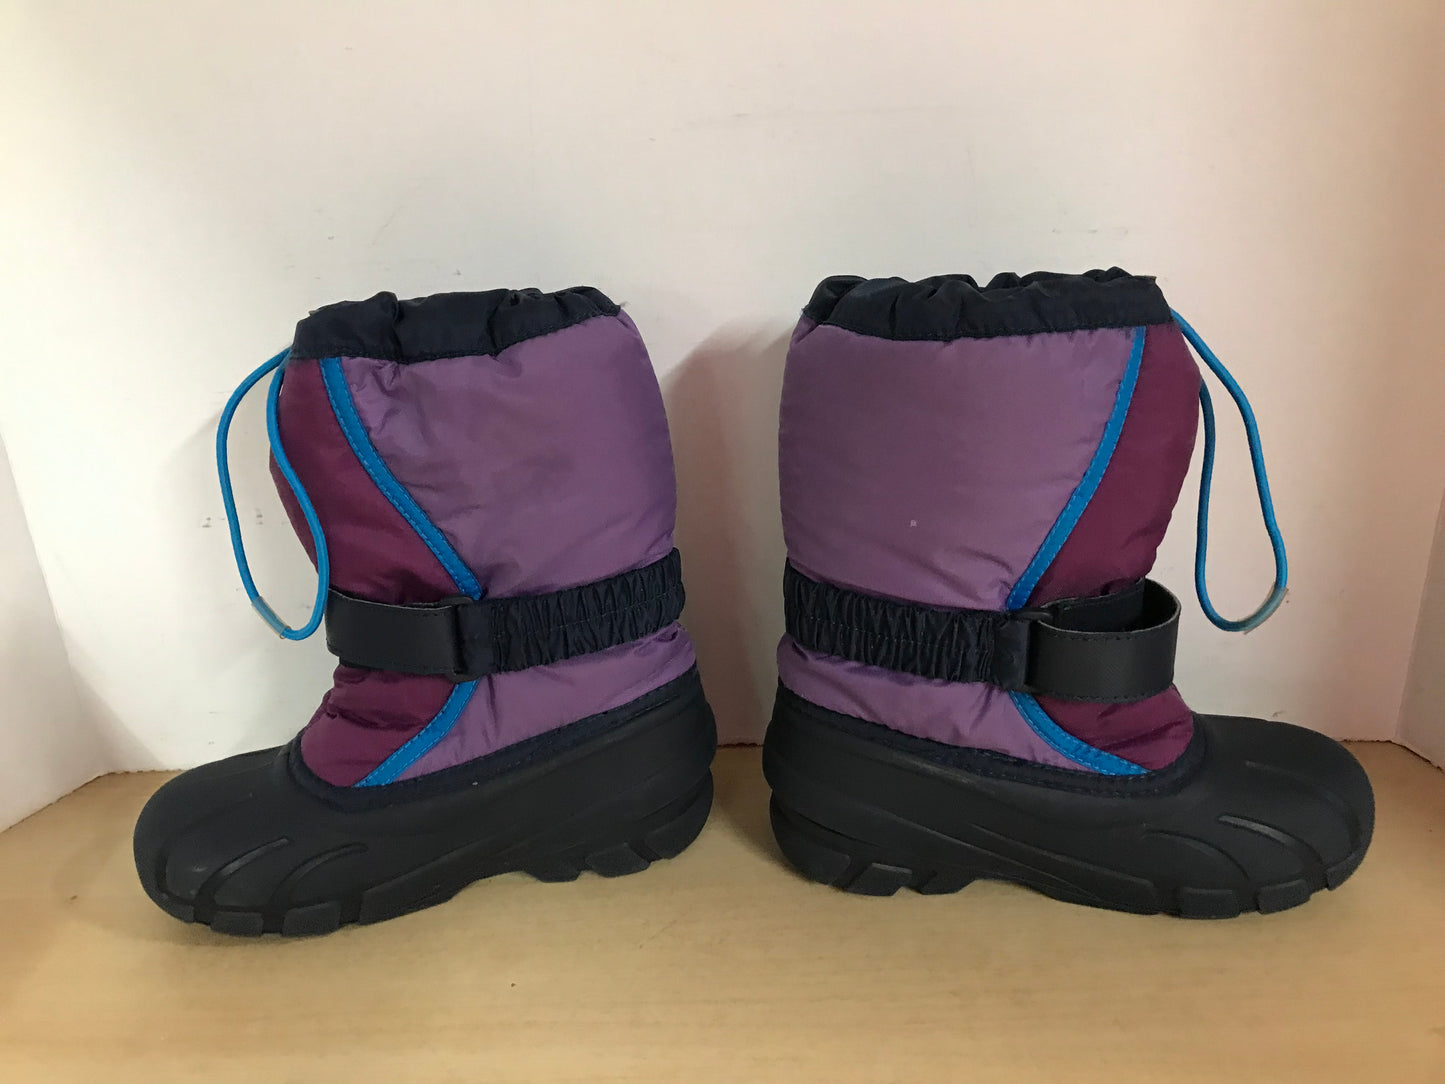 Winter Boots Child Size 1 Sorel Purple With Liner Excellent